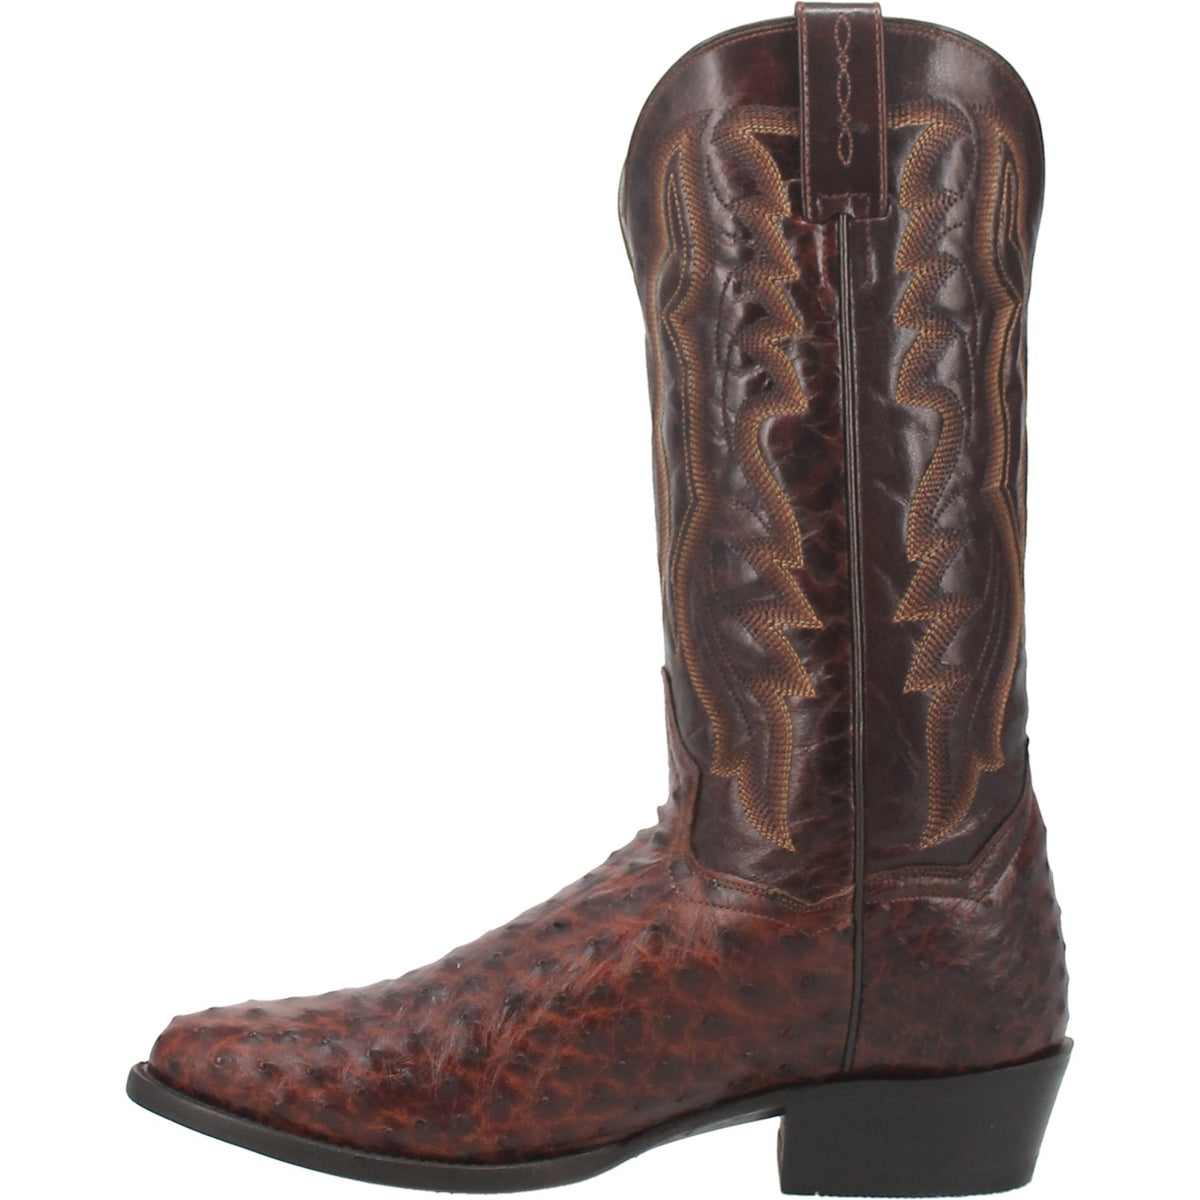 PERSHING FULL QUILL OSTRICH BOOT Image